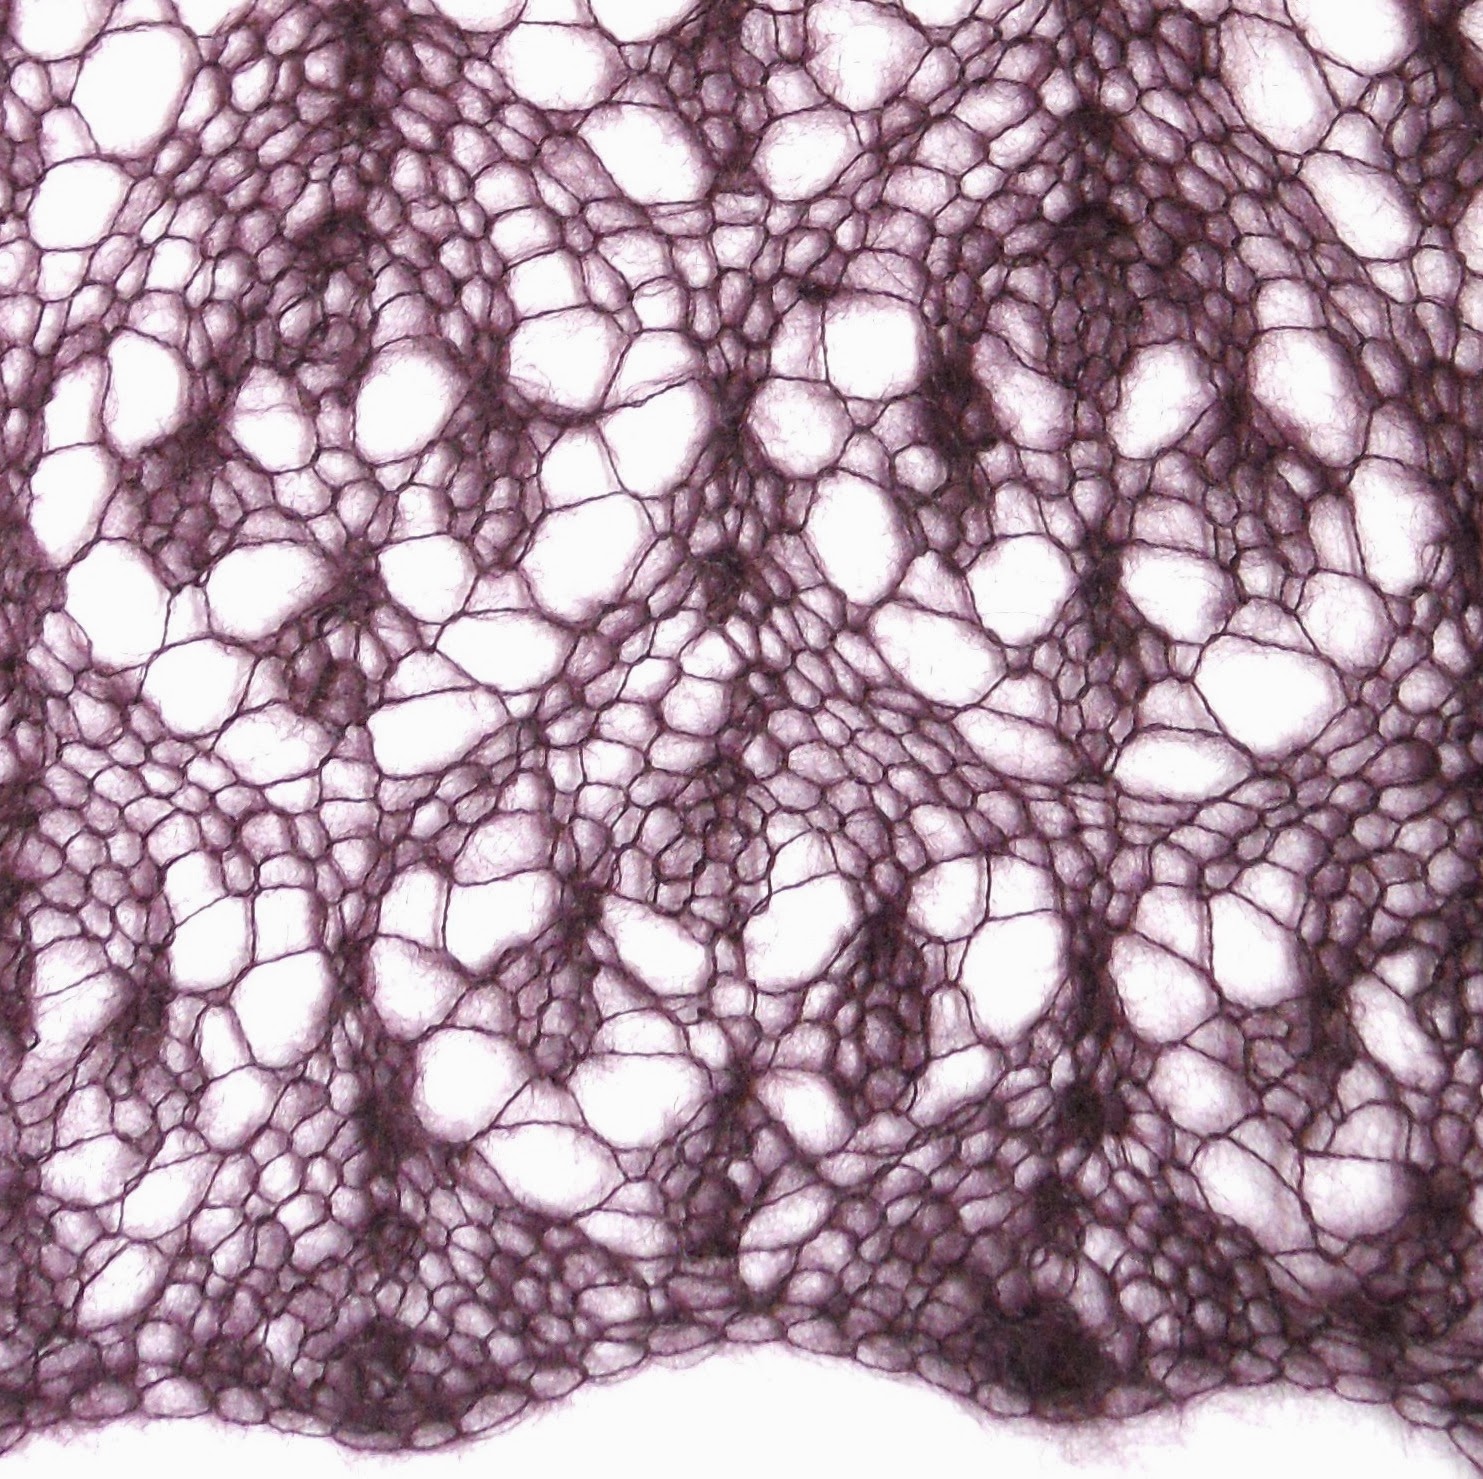 https://www.etsy.com/uk/listing/180625821/lace-scarf-shawl-hand-knitted-goth-wine